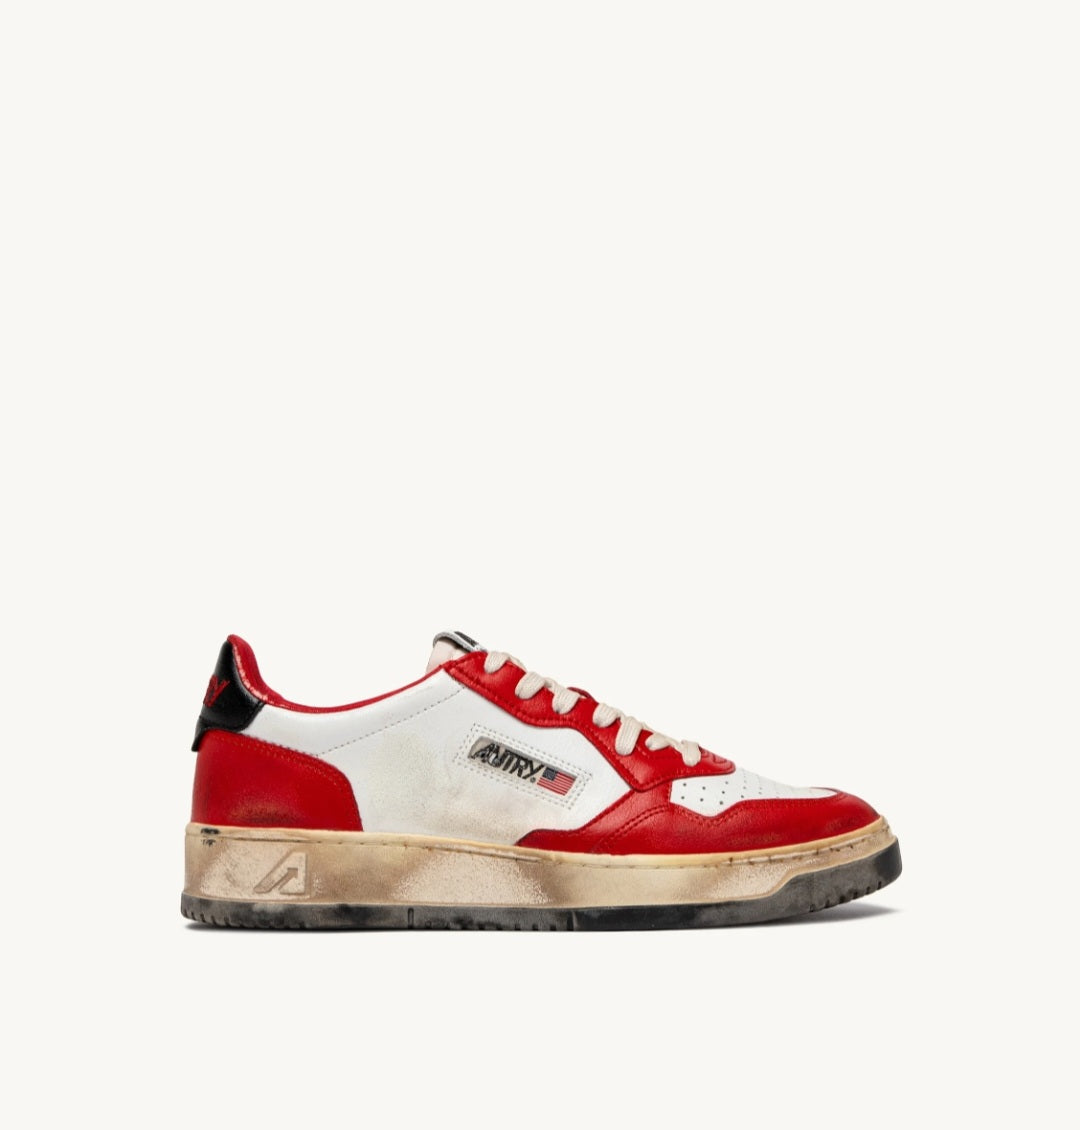 AUTRY Super Vintage Sneakers In Red, White And Black Leather